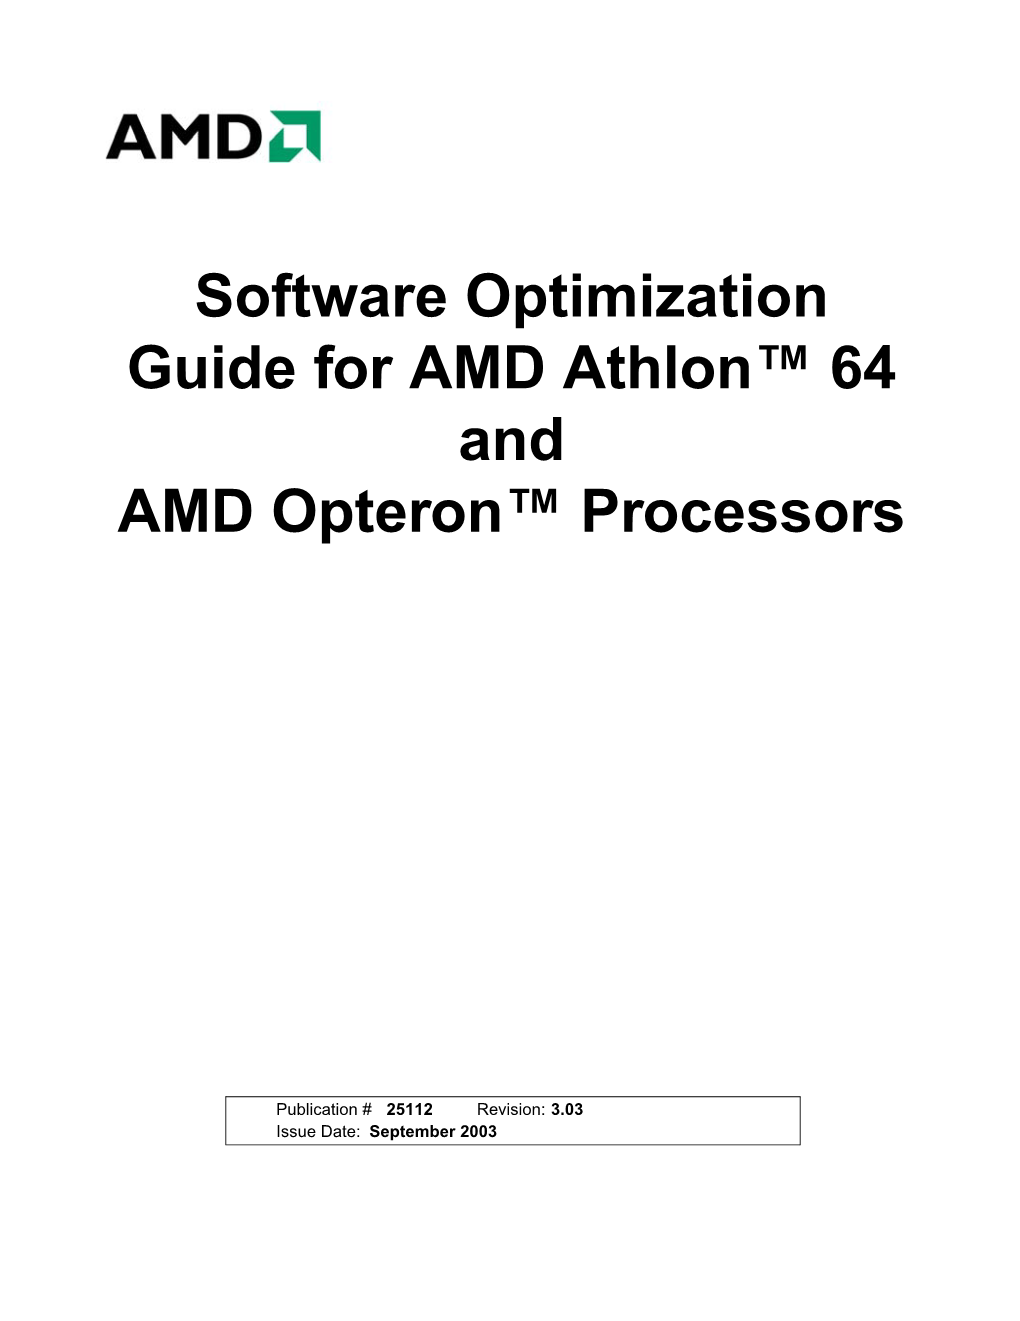 Software Optimization Guide for the AMD Hammer Processor